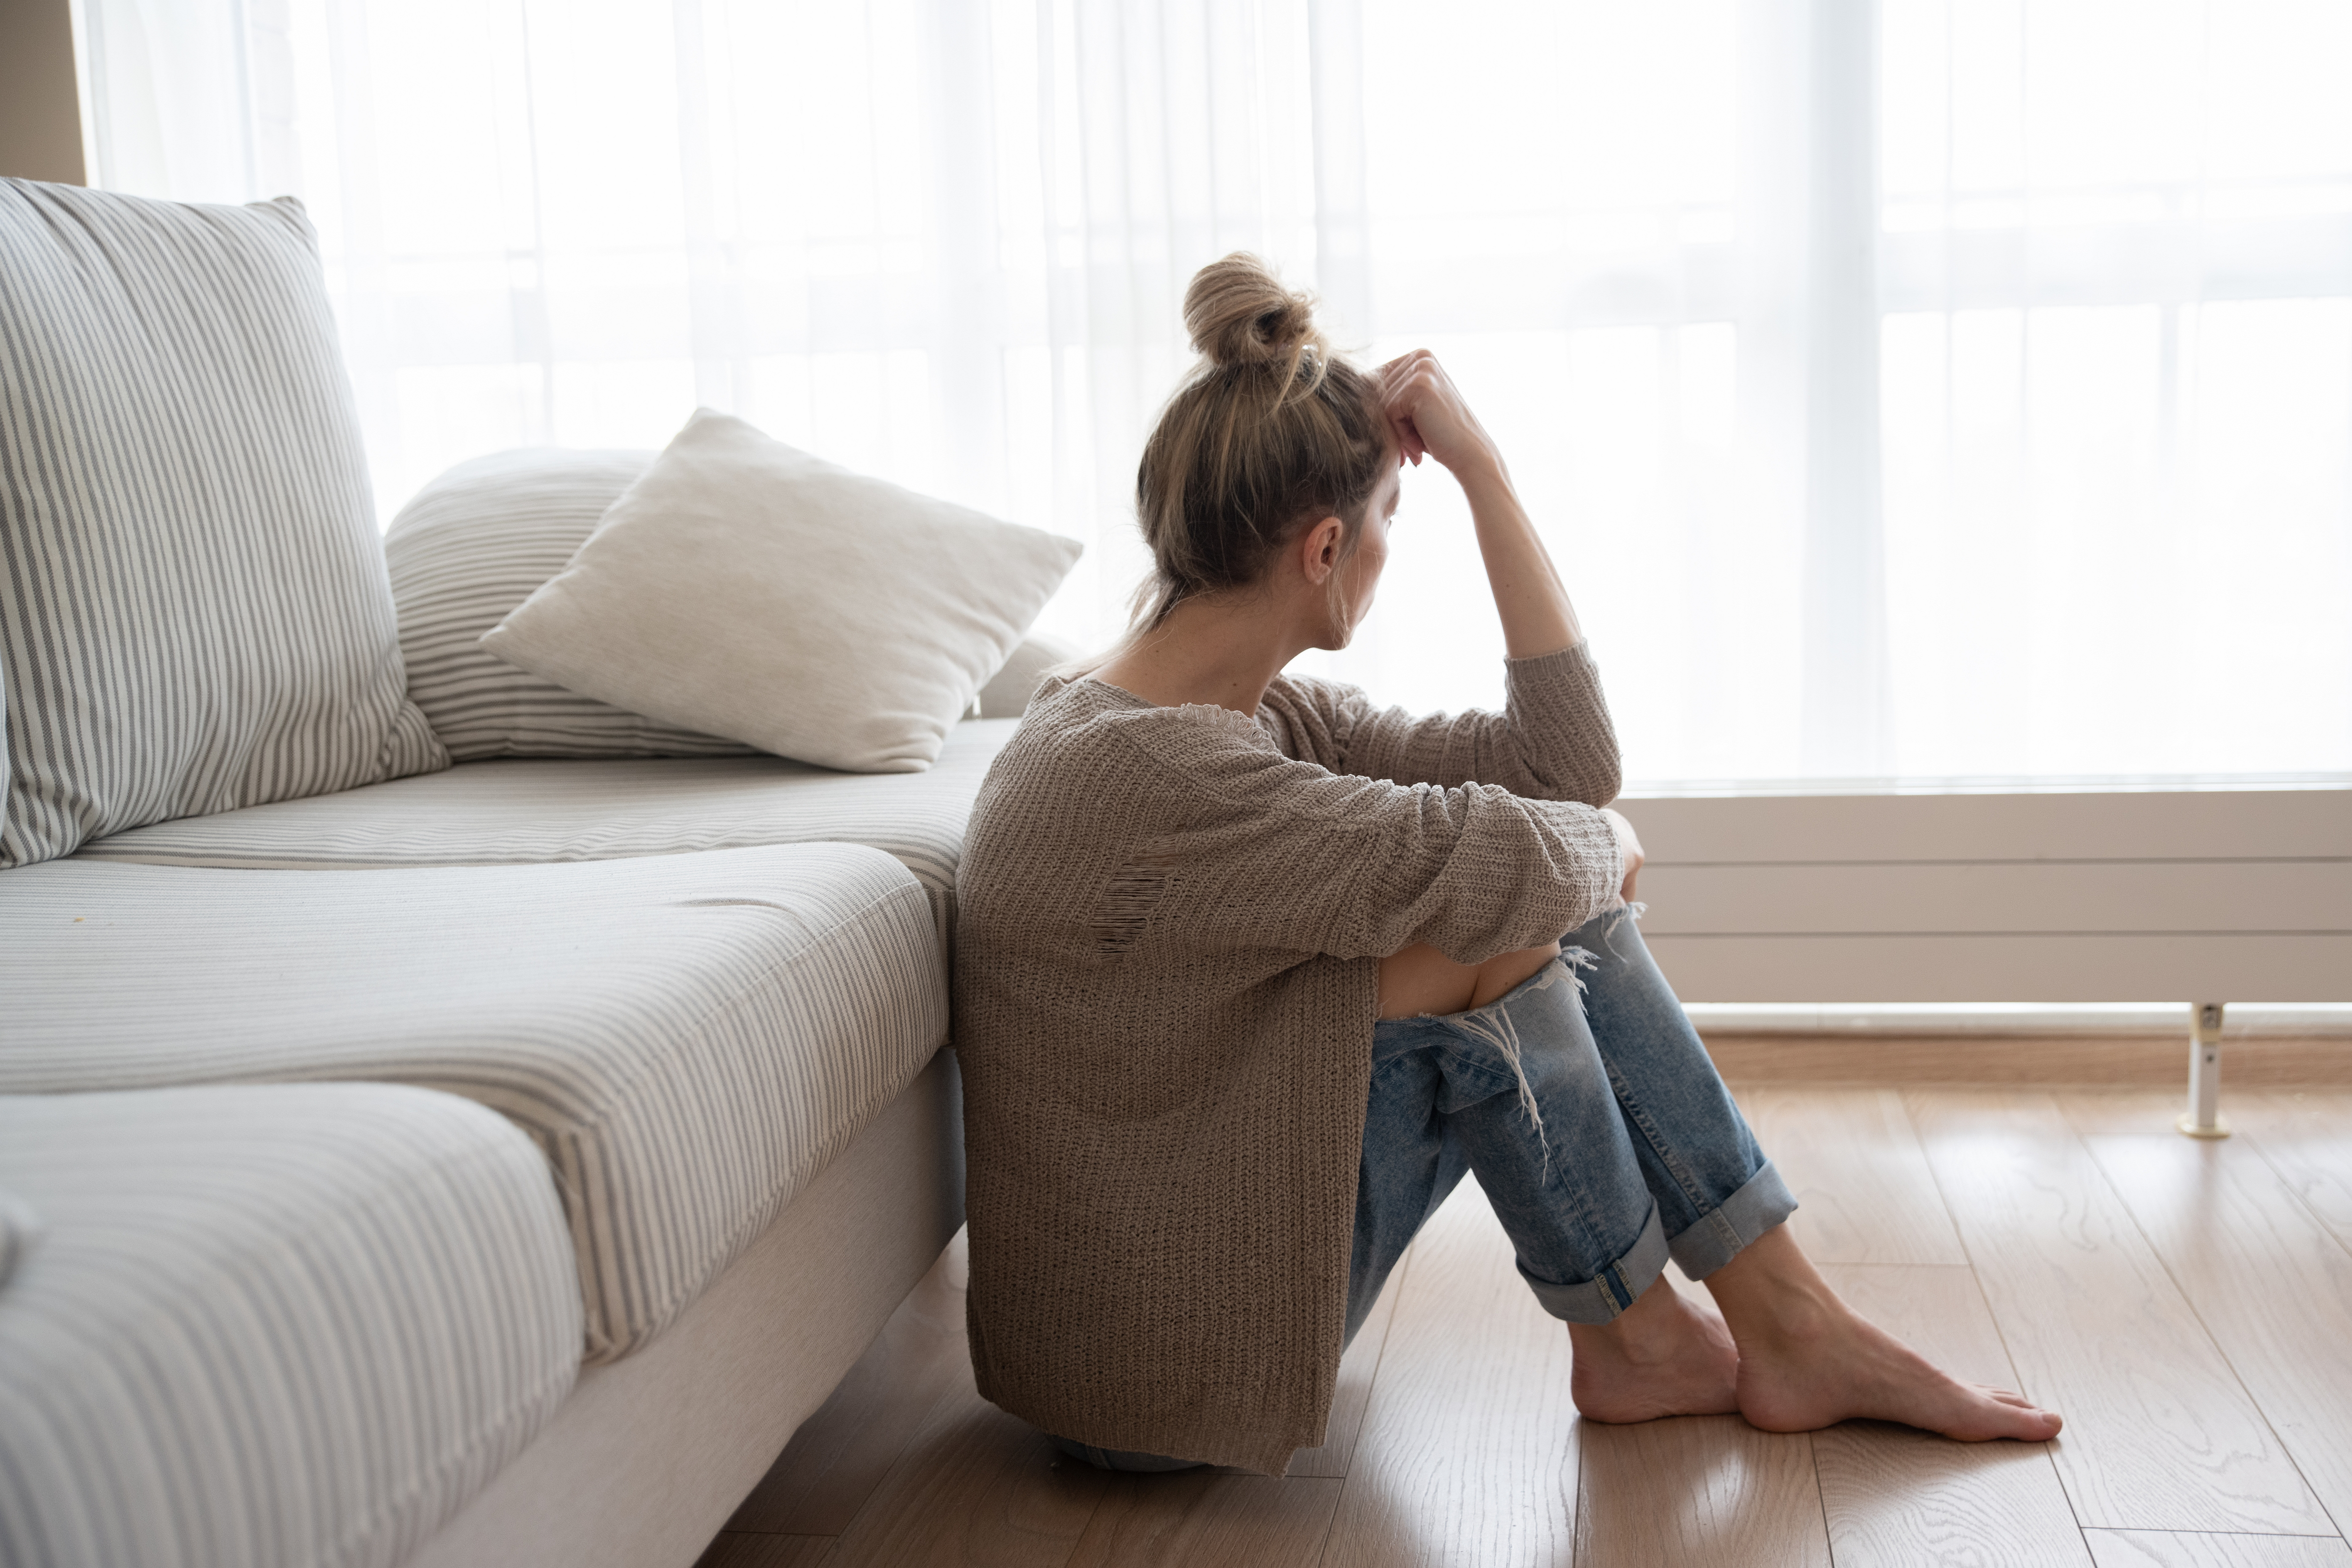 A depressed woman sitting on the floor | Source: Shutterstock